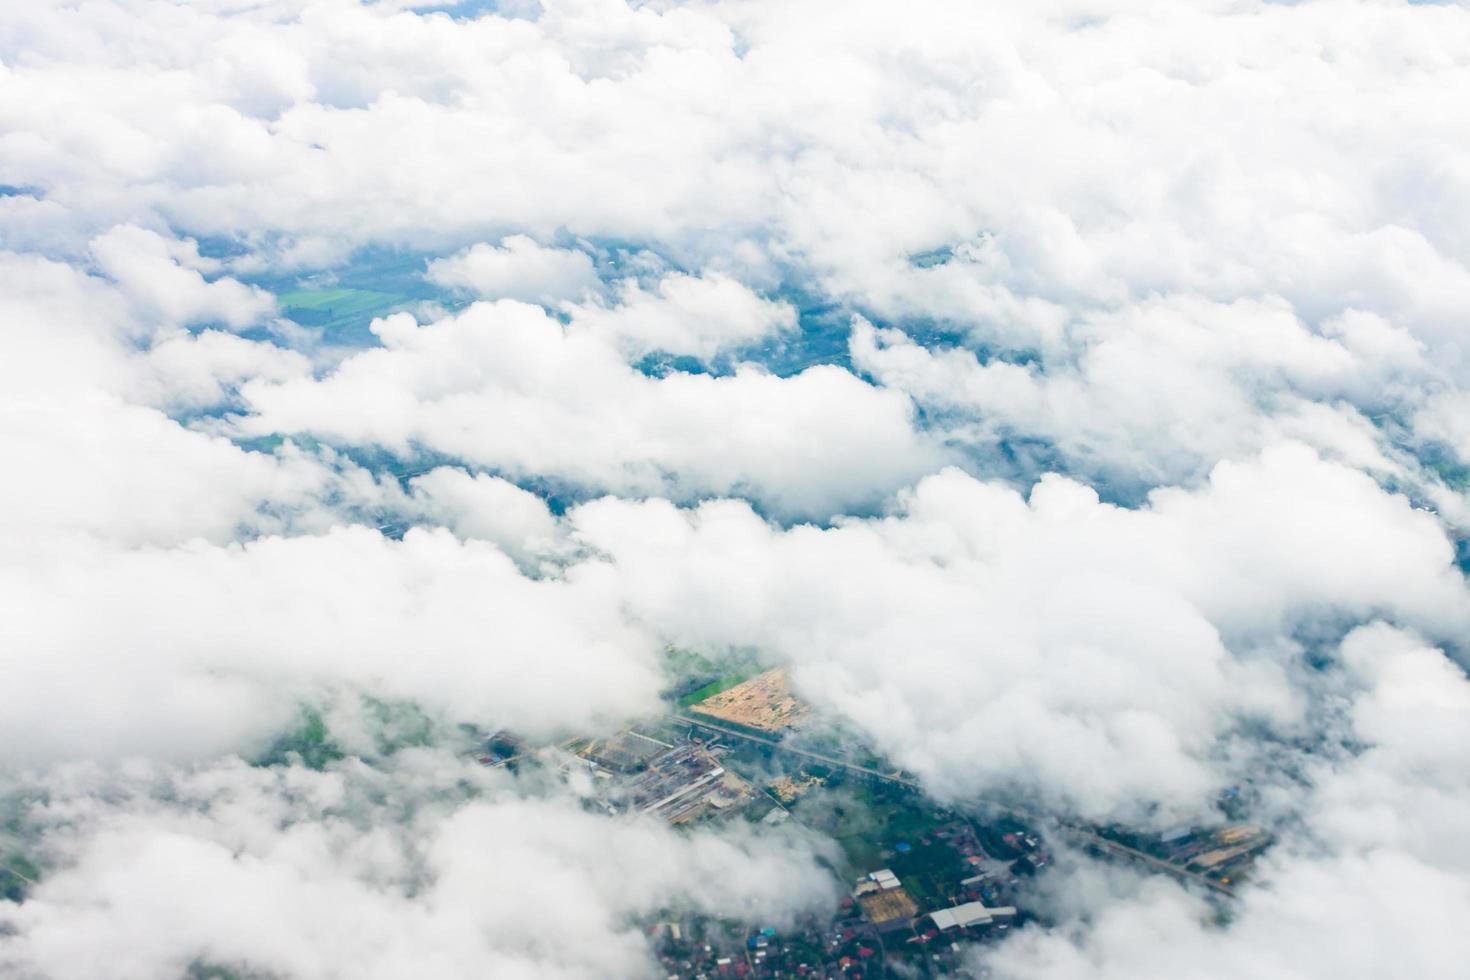 Top view from an airplane showing white clouds and the Earth below photo